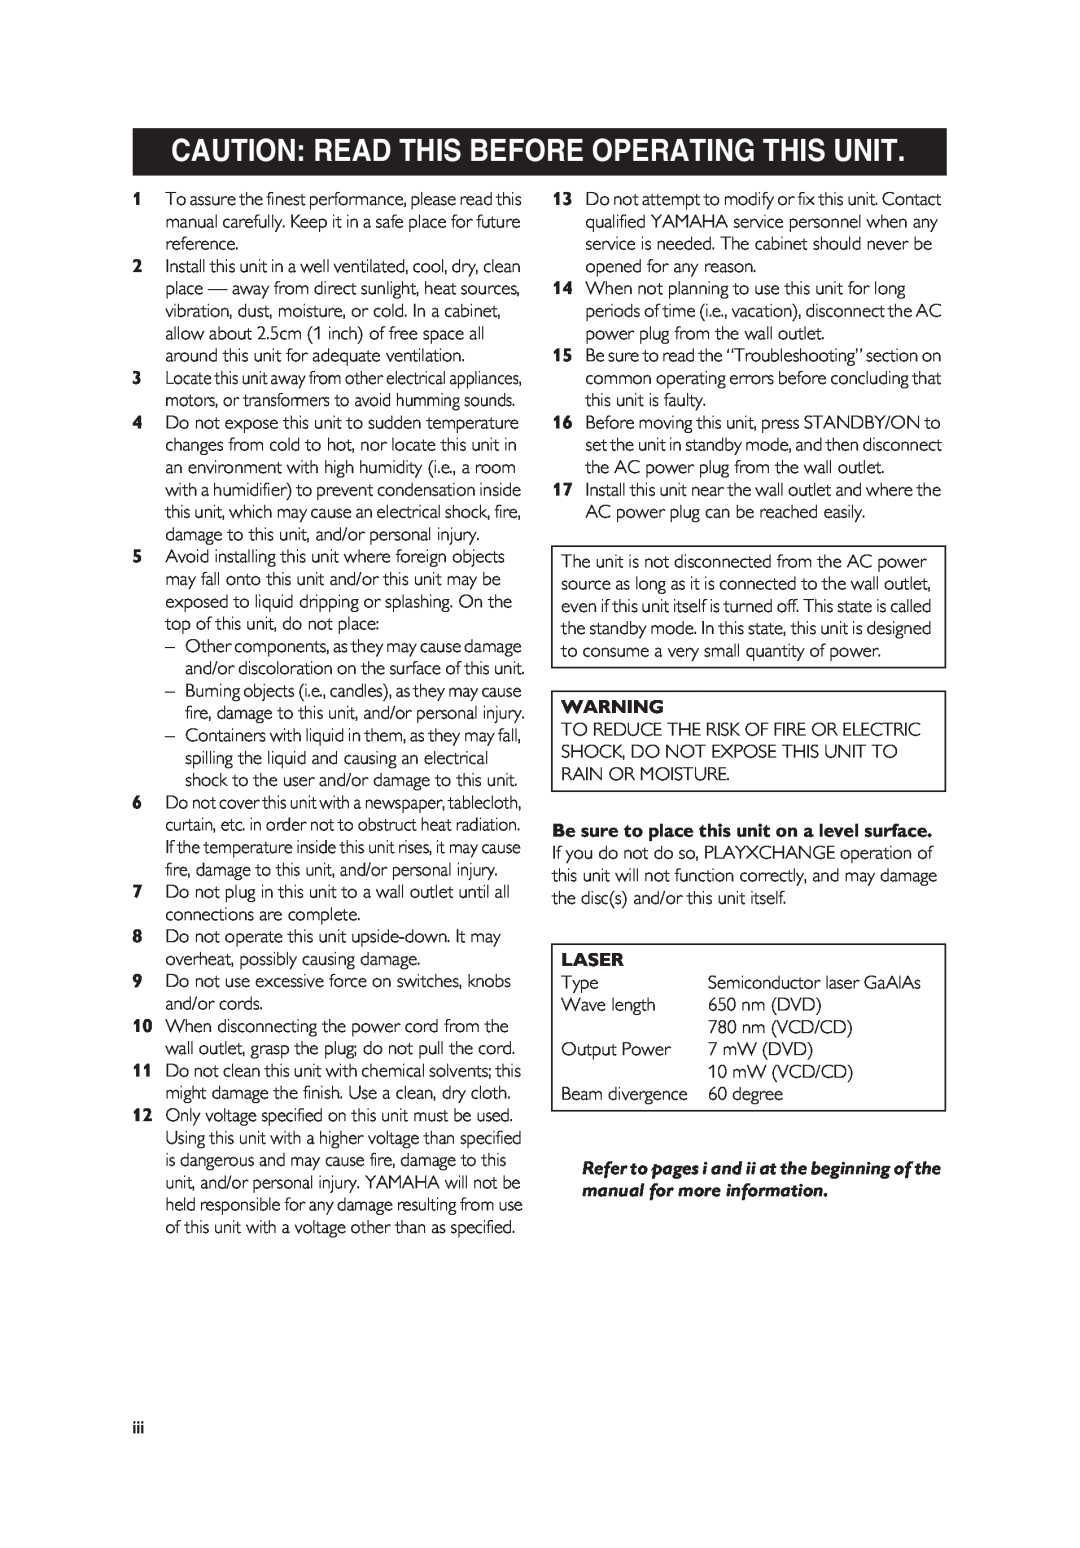 Yamaha Yamaha DVD Changer, DV-C6860 owner manual Caution Read This Before Operating This Unit, Laser 